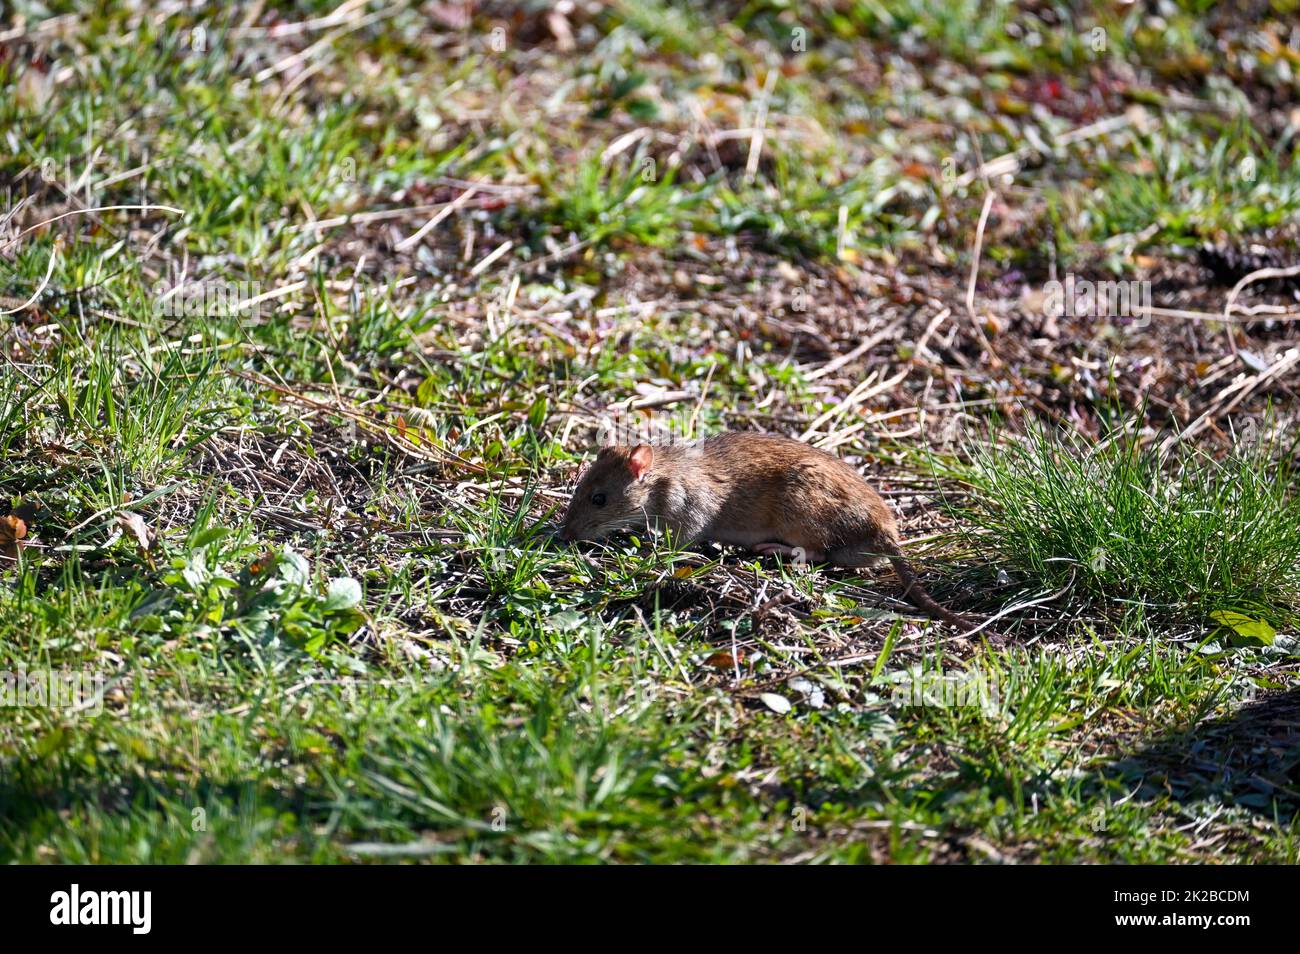 A rat in the garden during the day Stock Photo